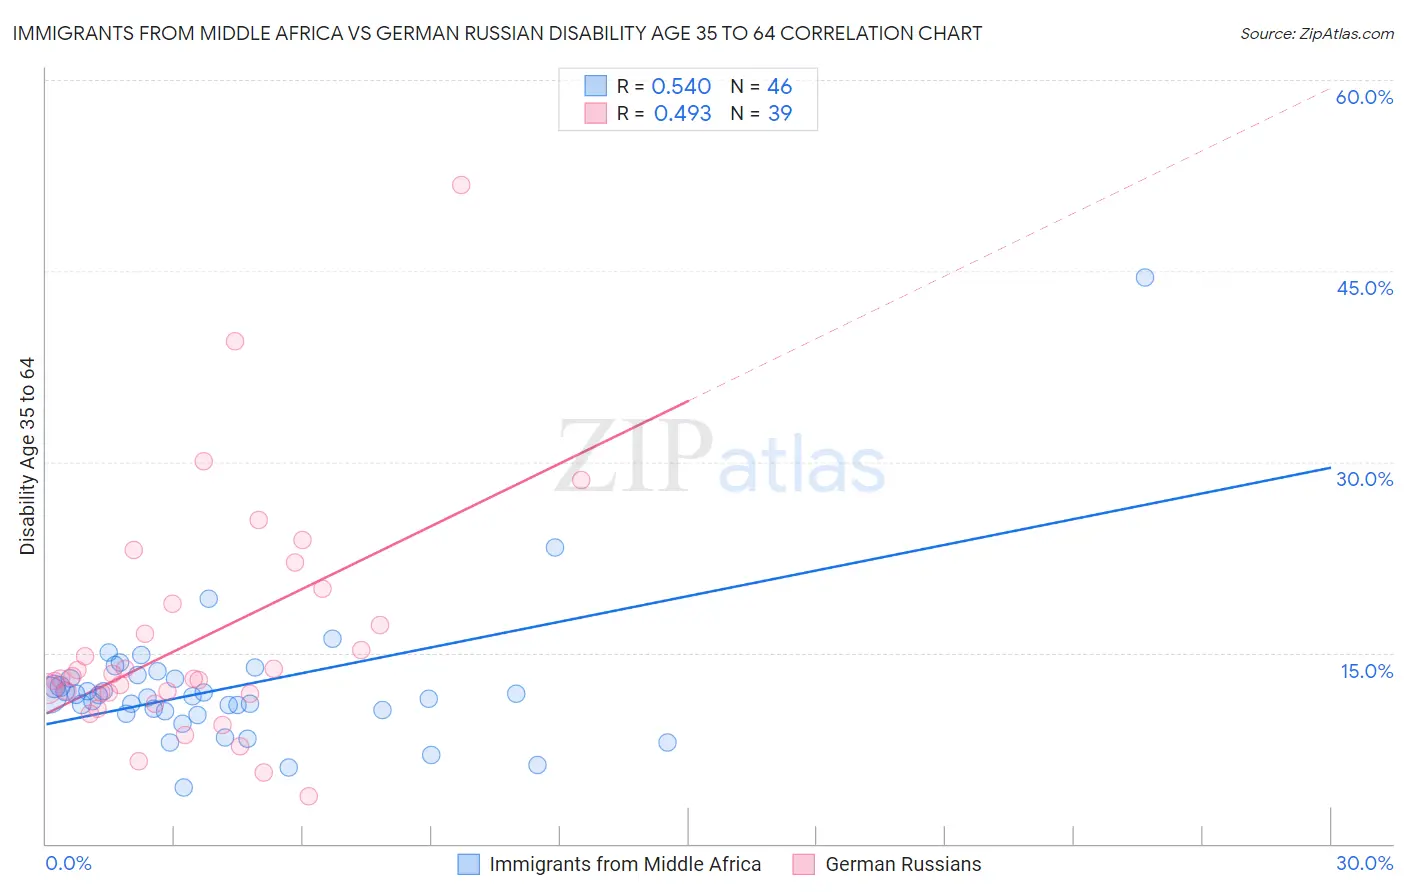 Immigrants from Middle Africa vs German Russian Disability Age 35 to 64